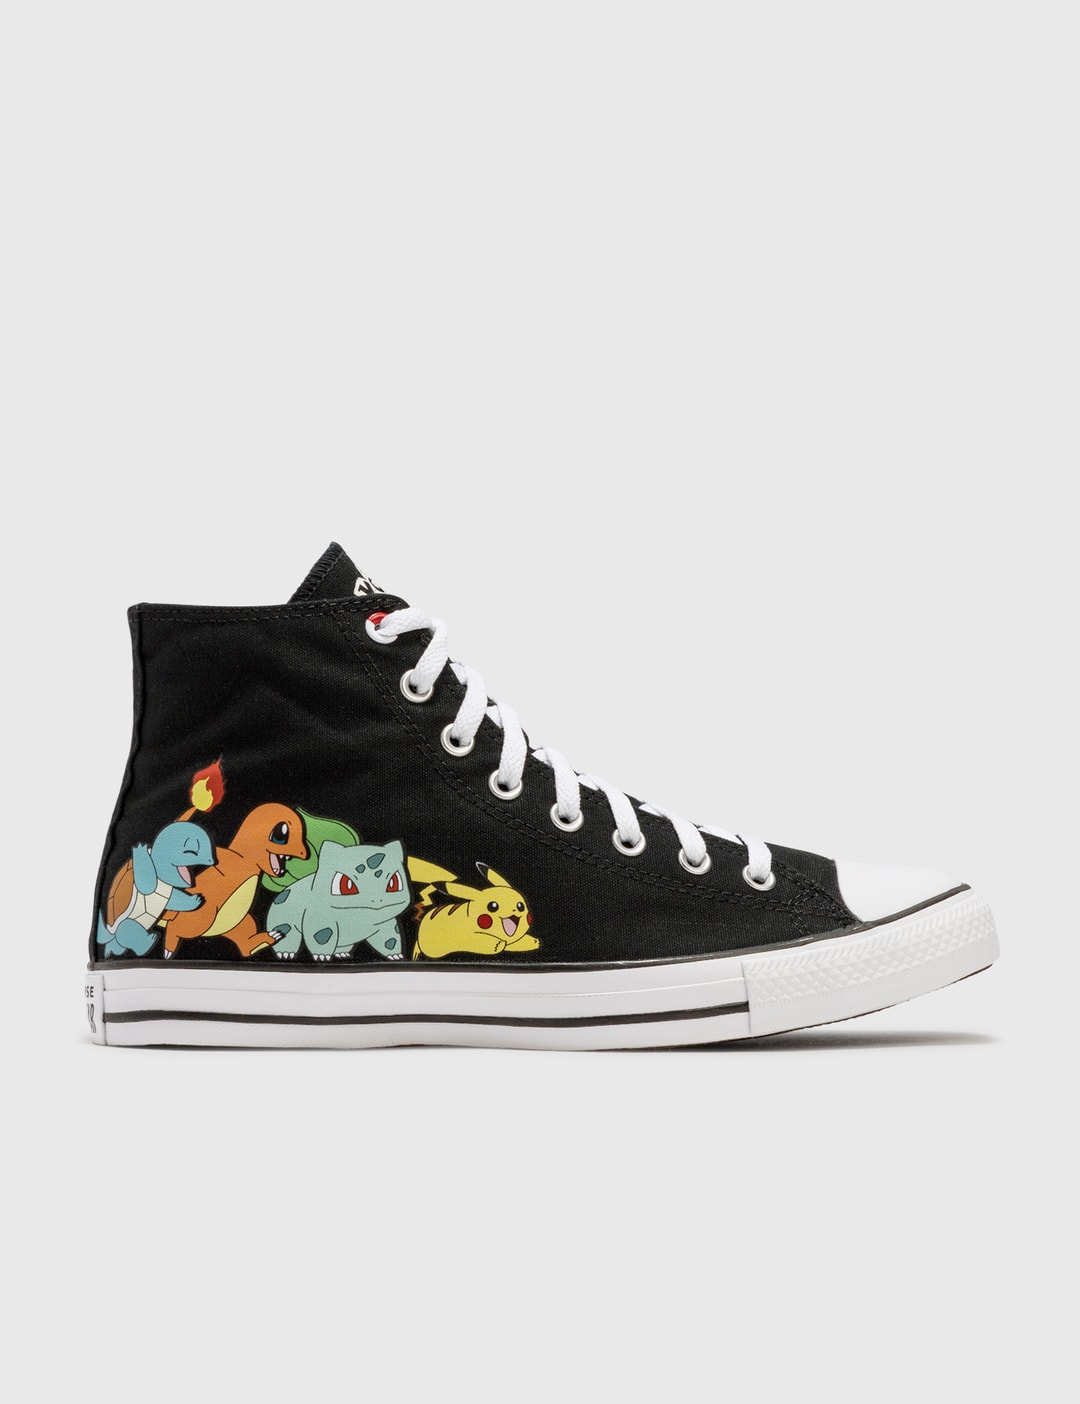 Converse - Converse x Pokémon Chuck Taylor All Star | HBX - Globally  Curated Fashion and Lifestyle by Hypebeast